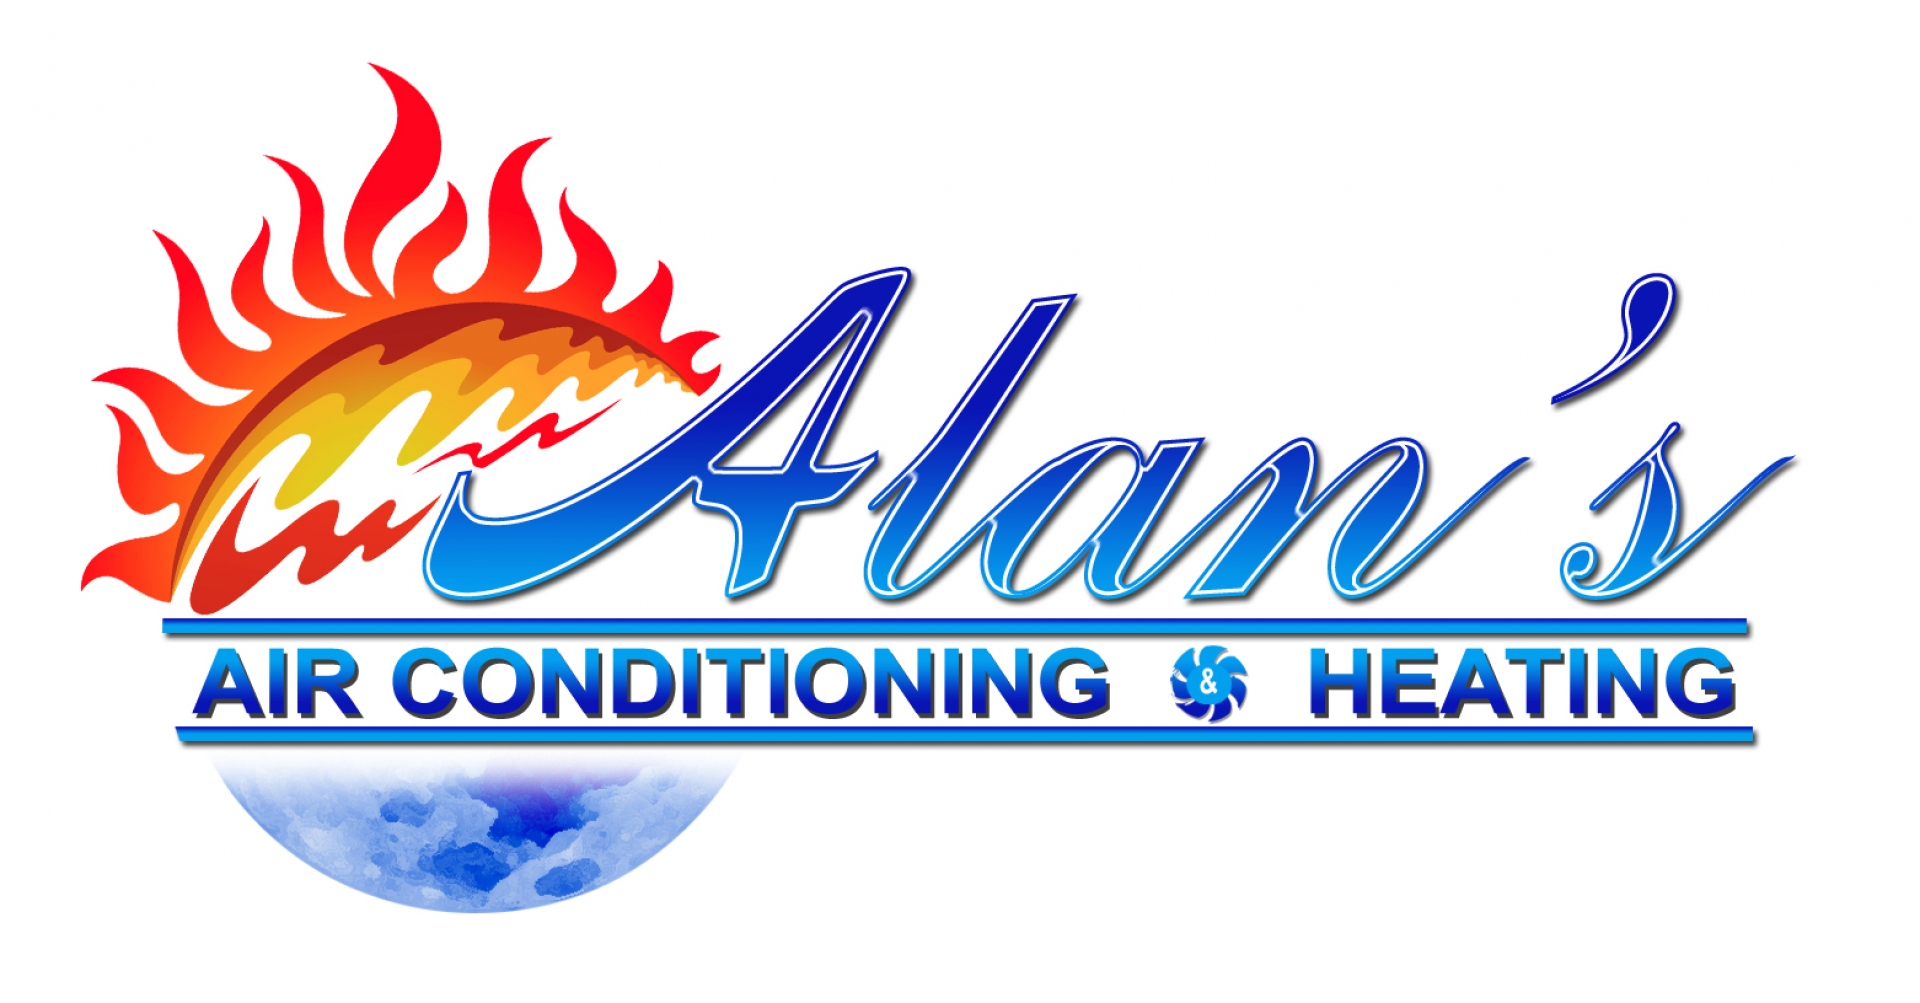 Alan's Air Conditioning and Heating company logo